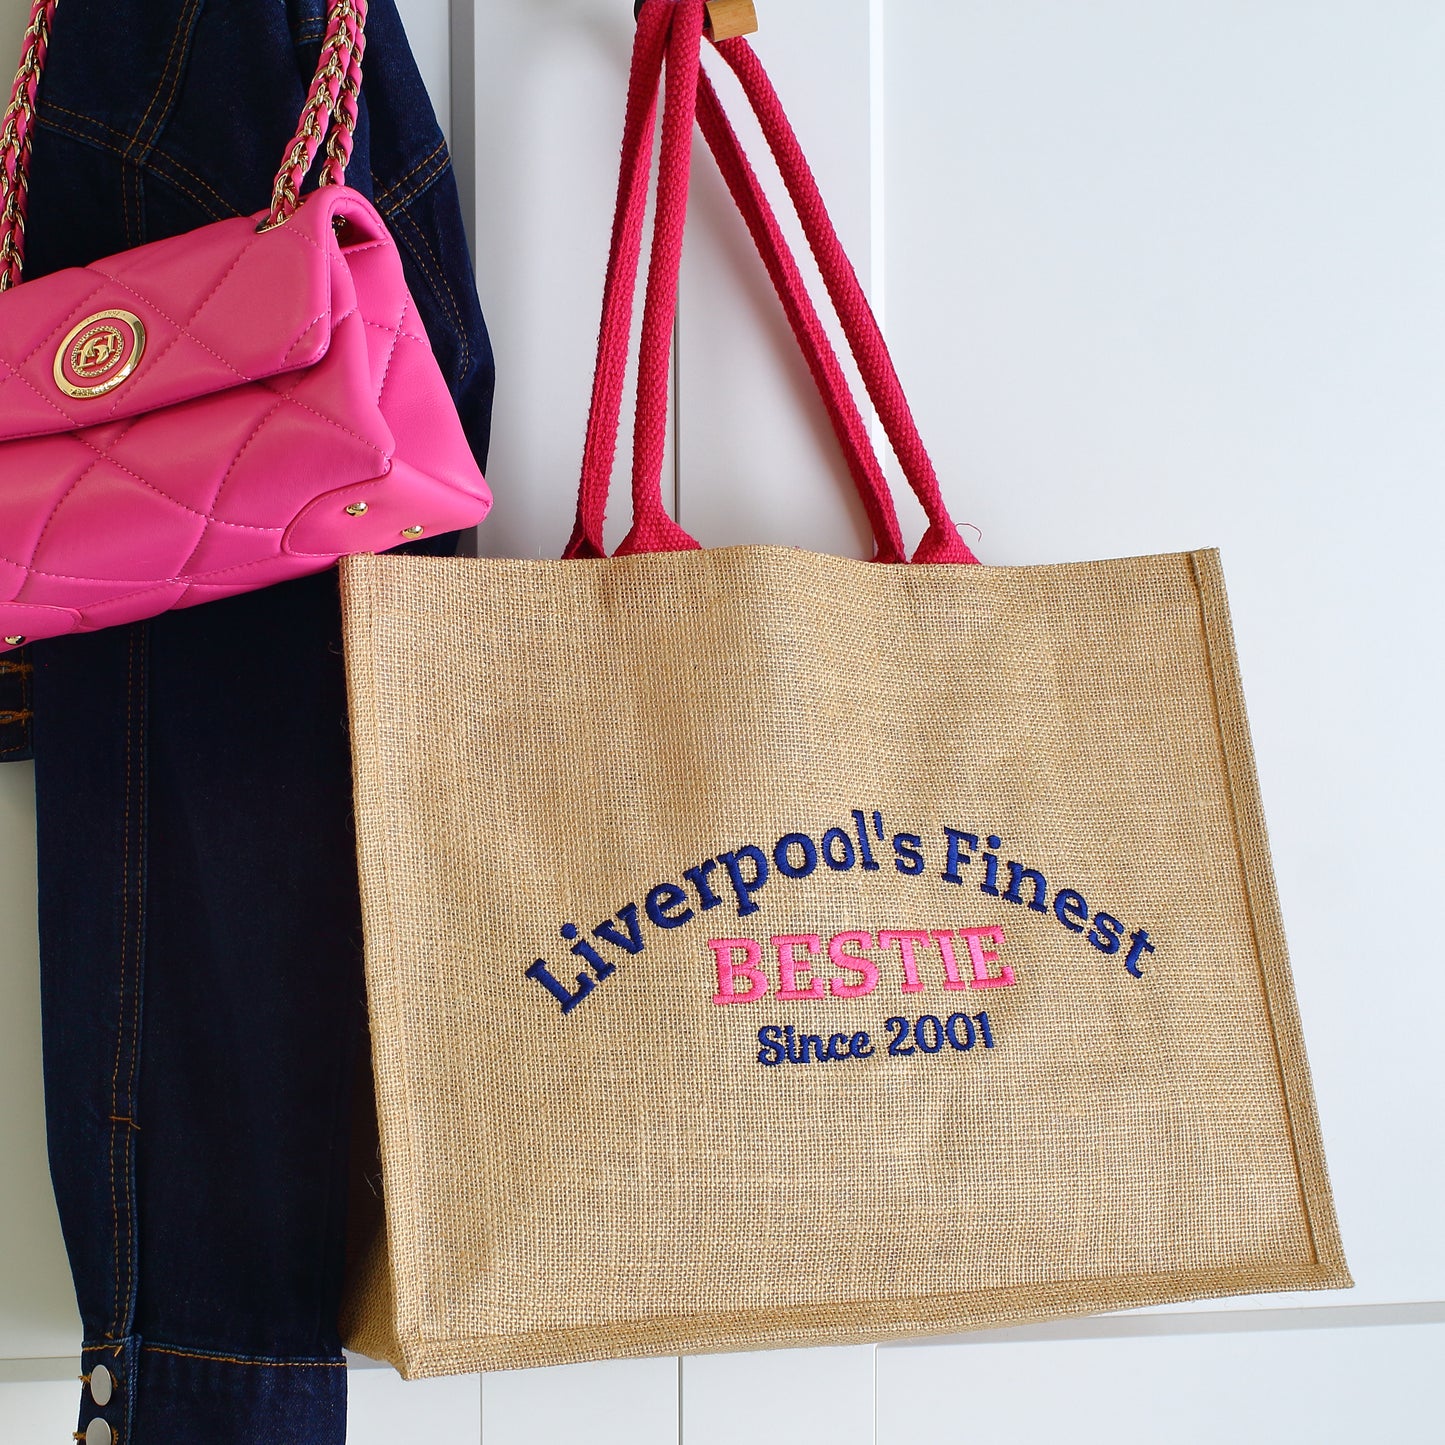 NEW - Embroidered Finest... Bestie Tote Bag